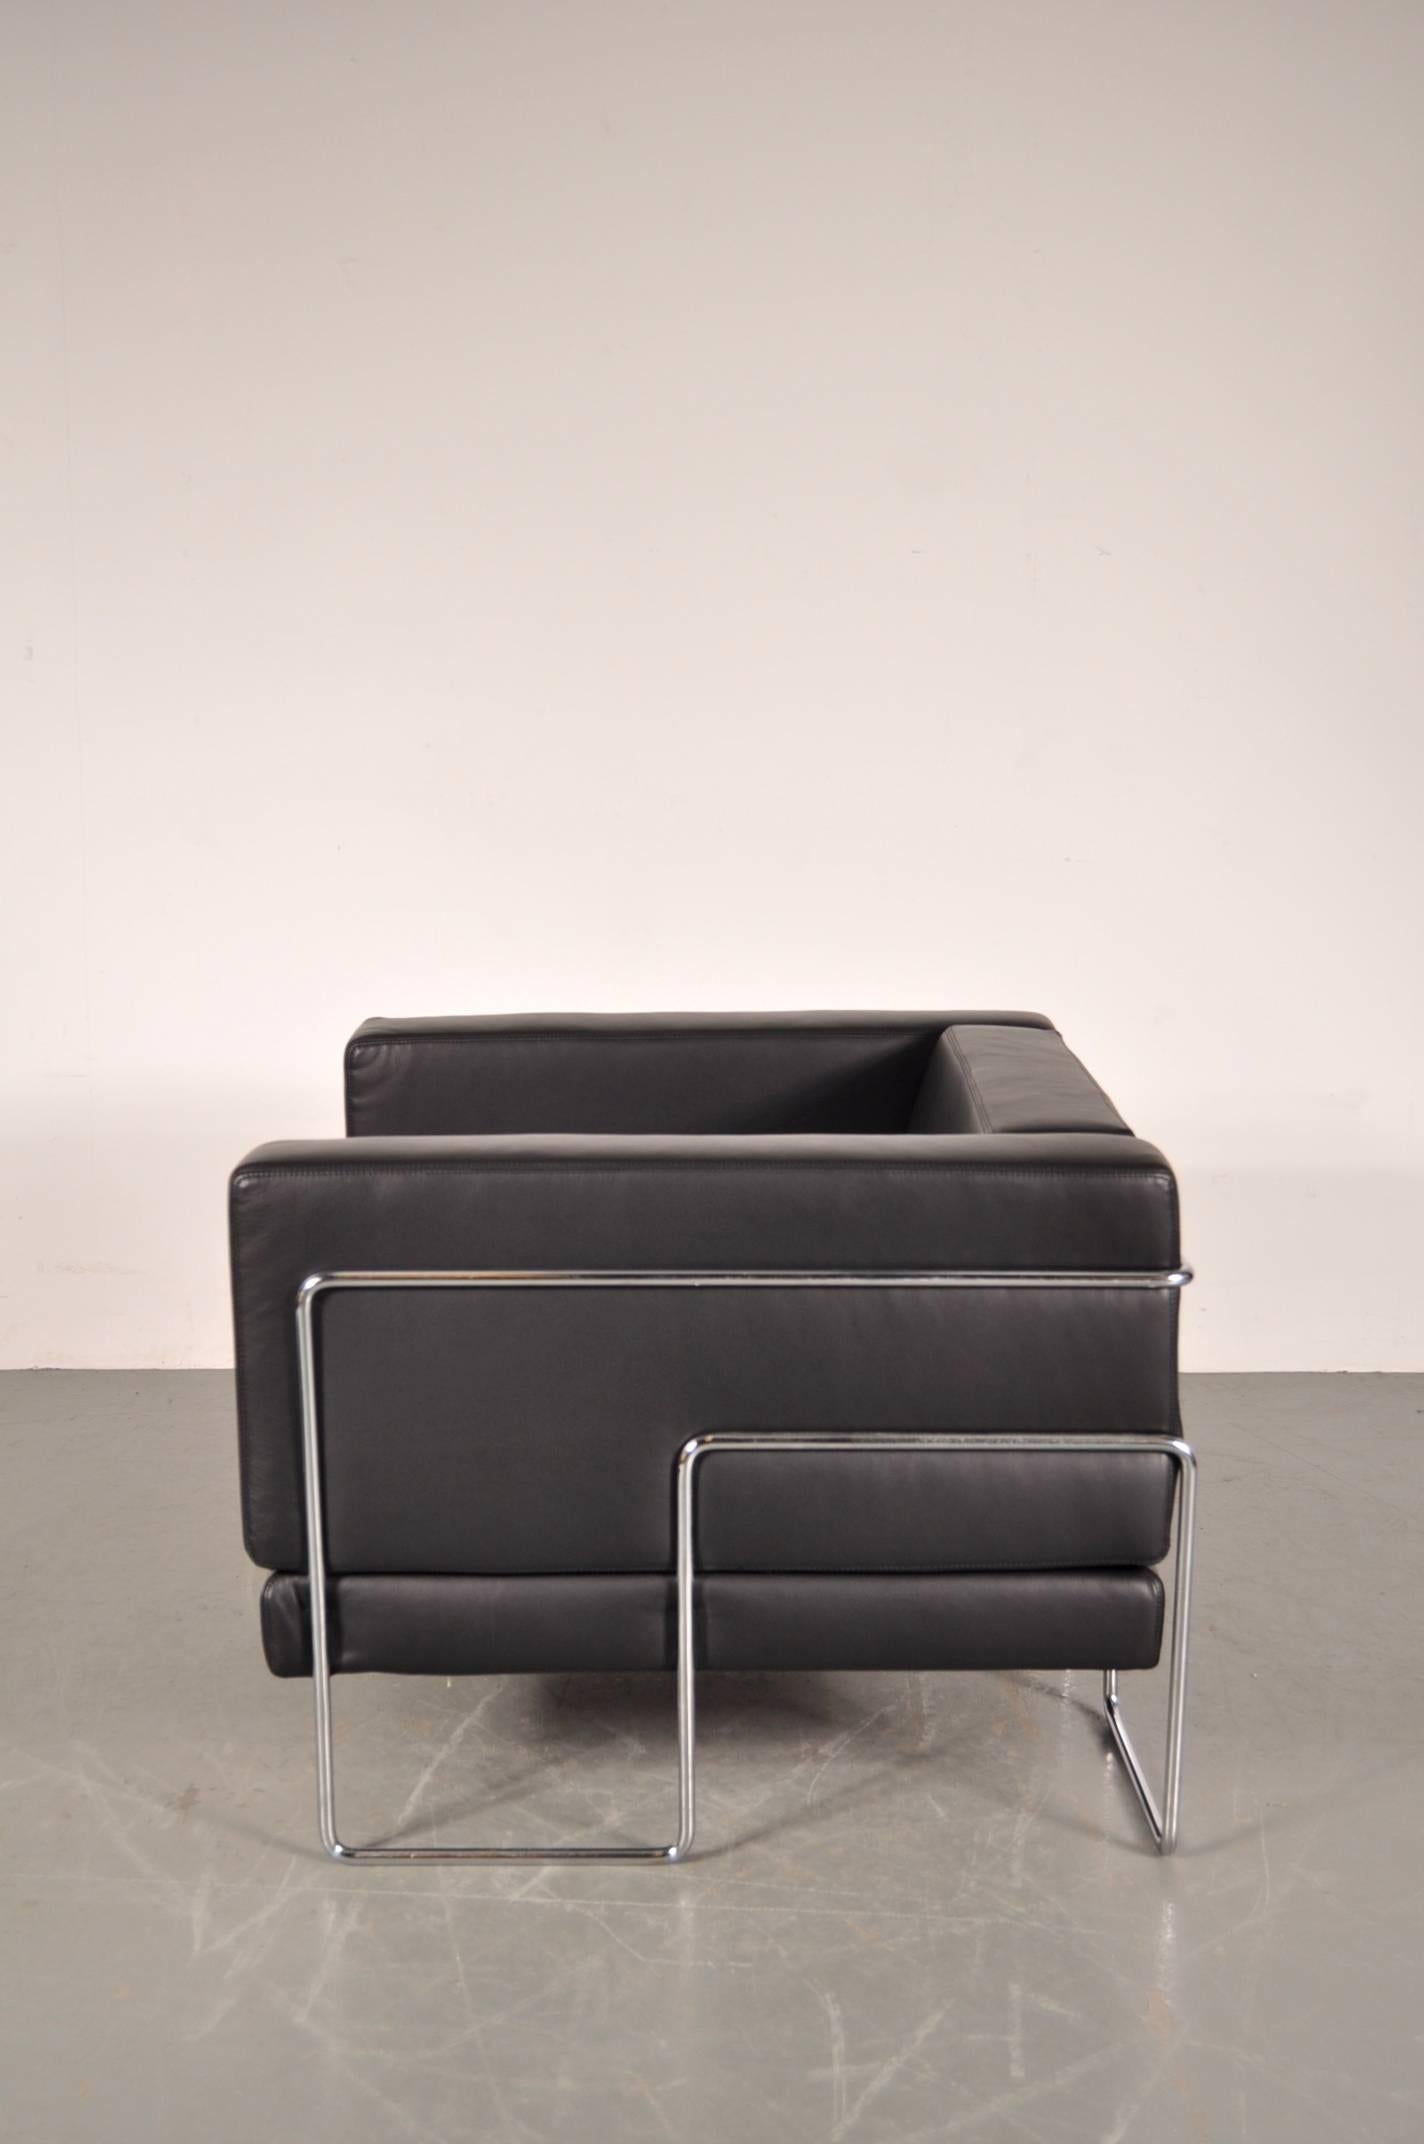 Mid-20th Century Lounge Chair by Kwok Hoï Chan for Steiner, France, 1969 For Sale